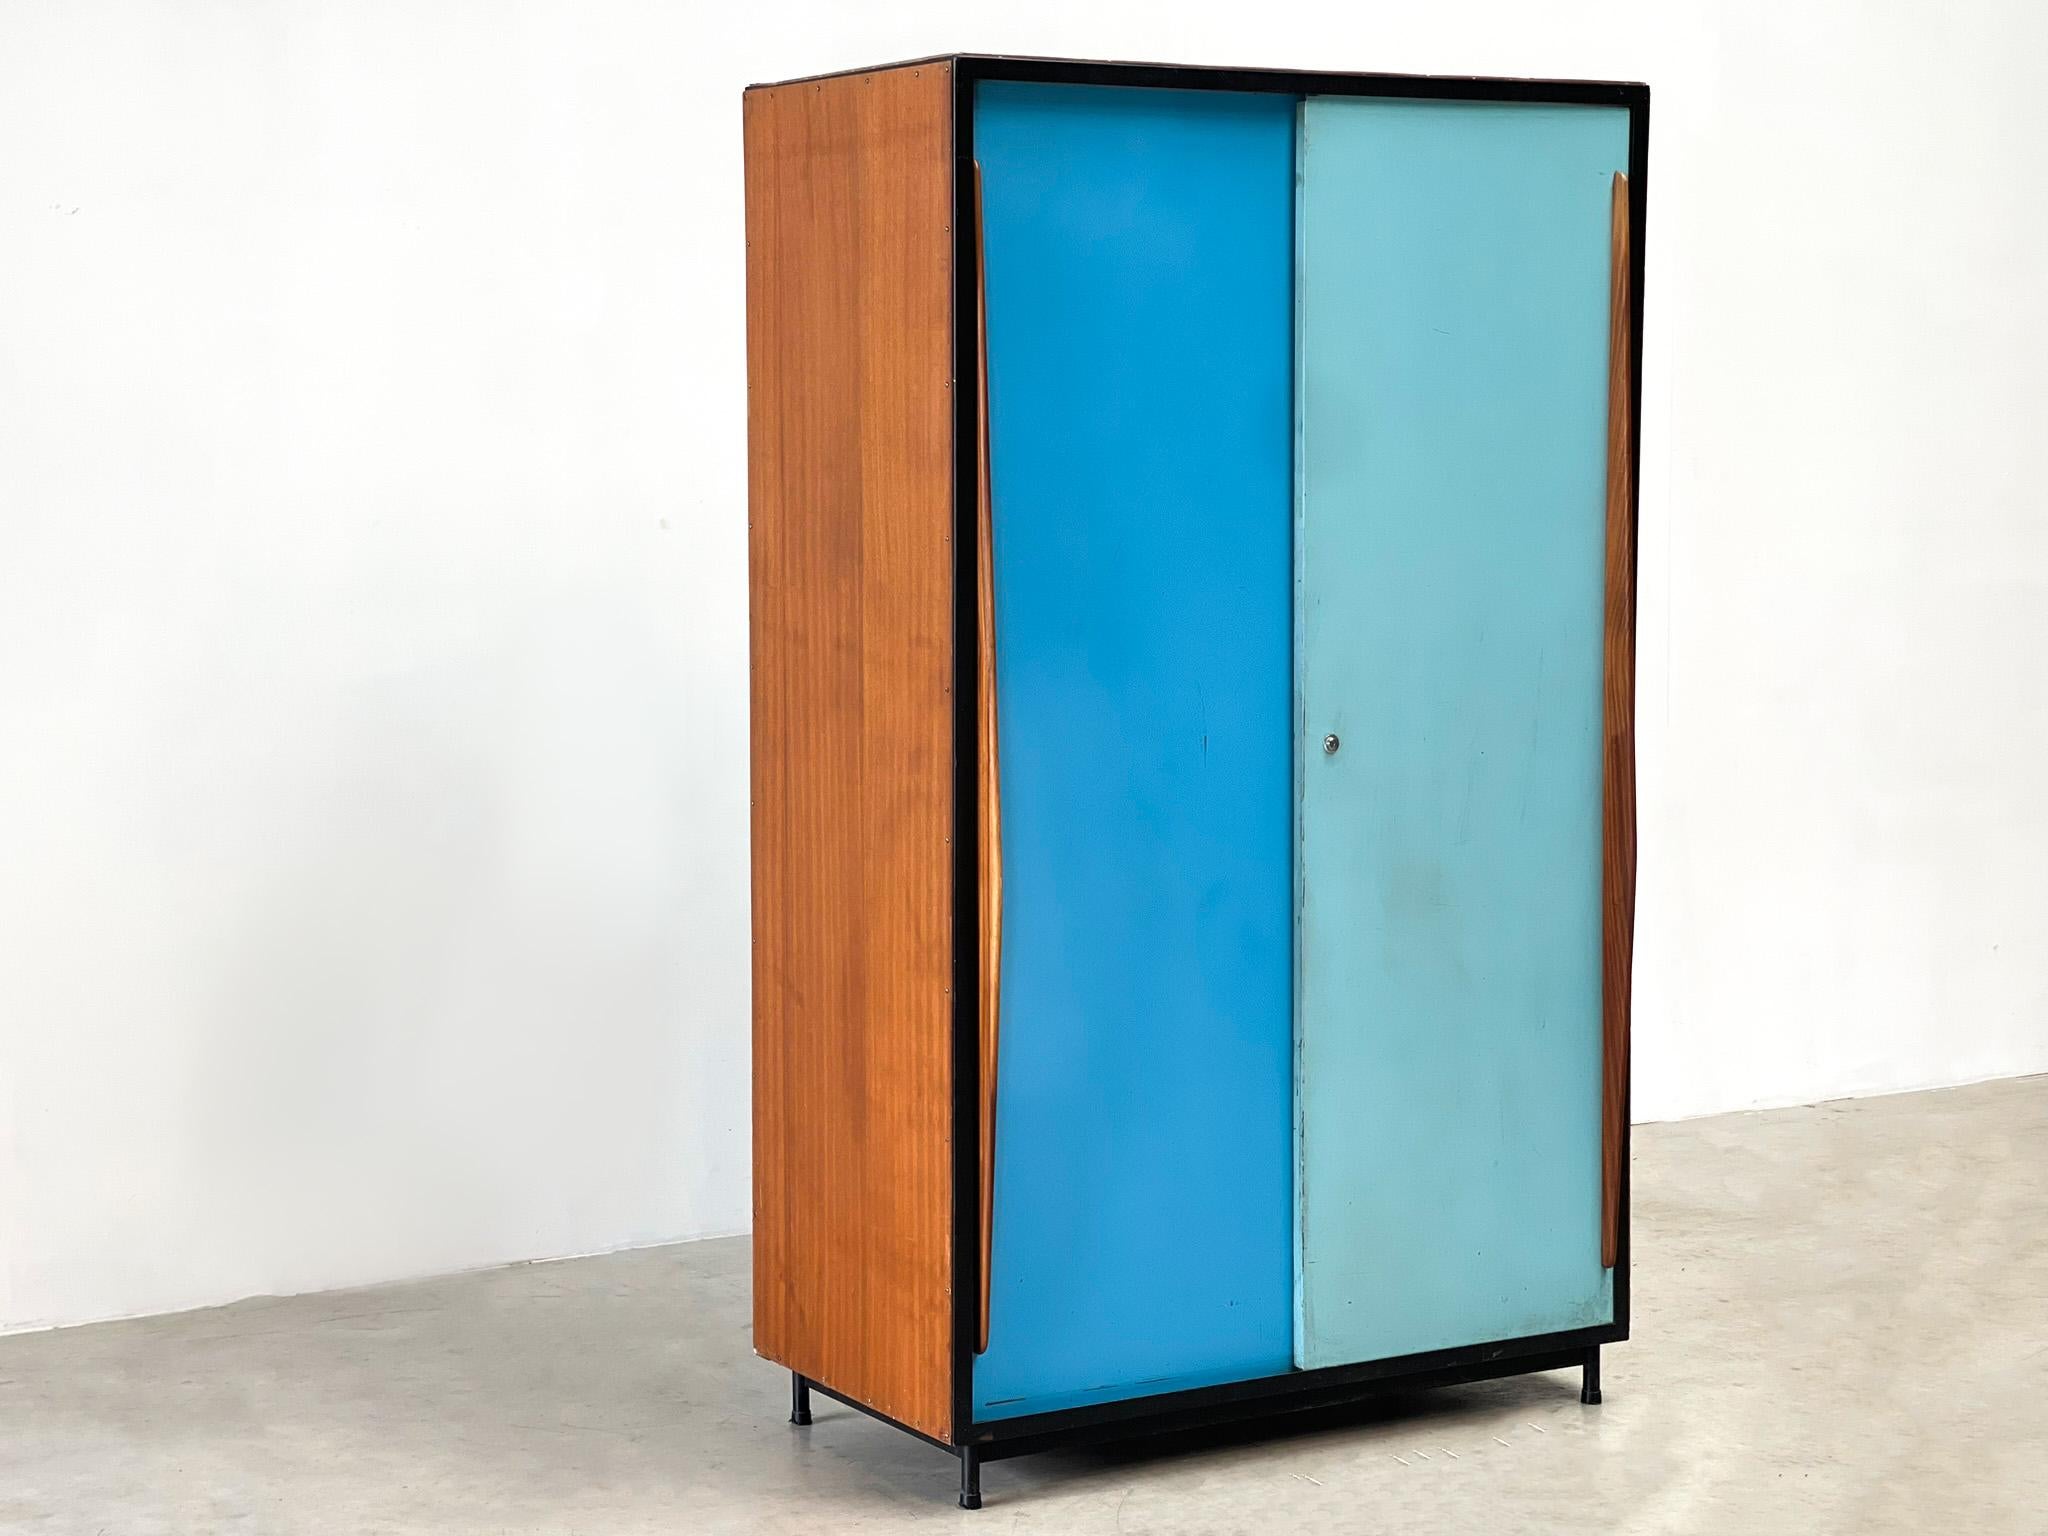 Rare piece by one of Belgium's well-known designers. This top cabinet is by Willy Van Der Meeren. Willy designed this in the 50s for the Belgian manufacturer Tubax. These wardrobes were often produced for schools and factories. 

 

The cabinet in